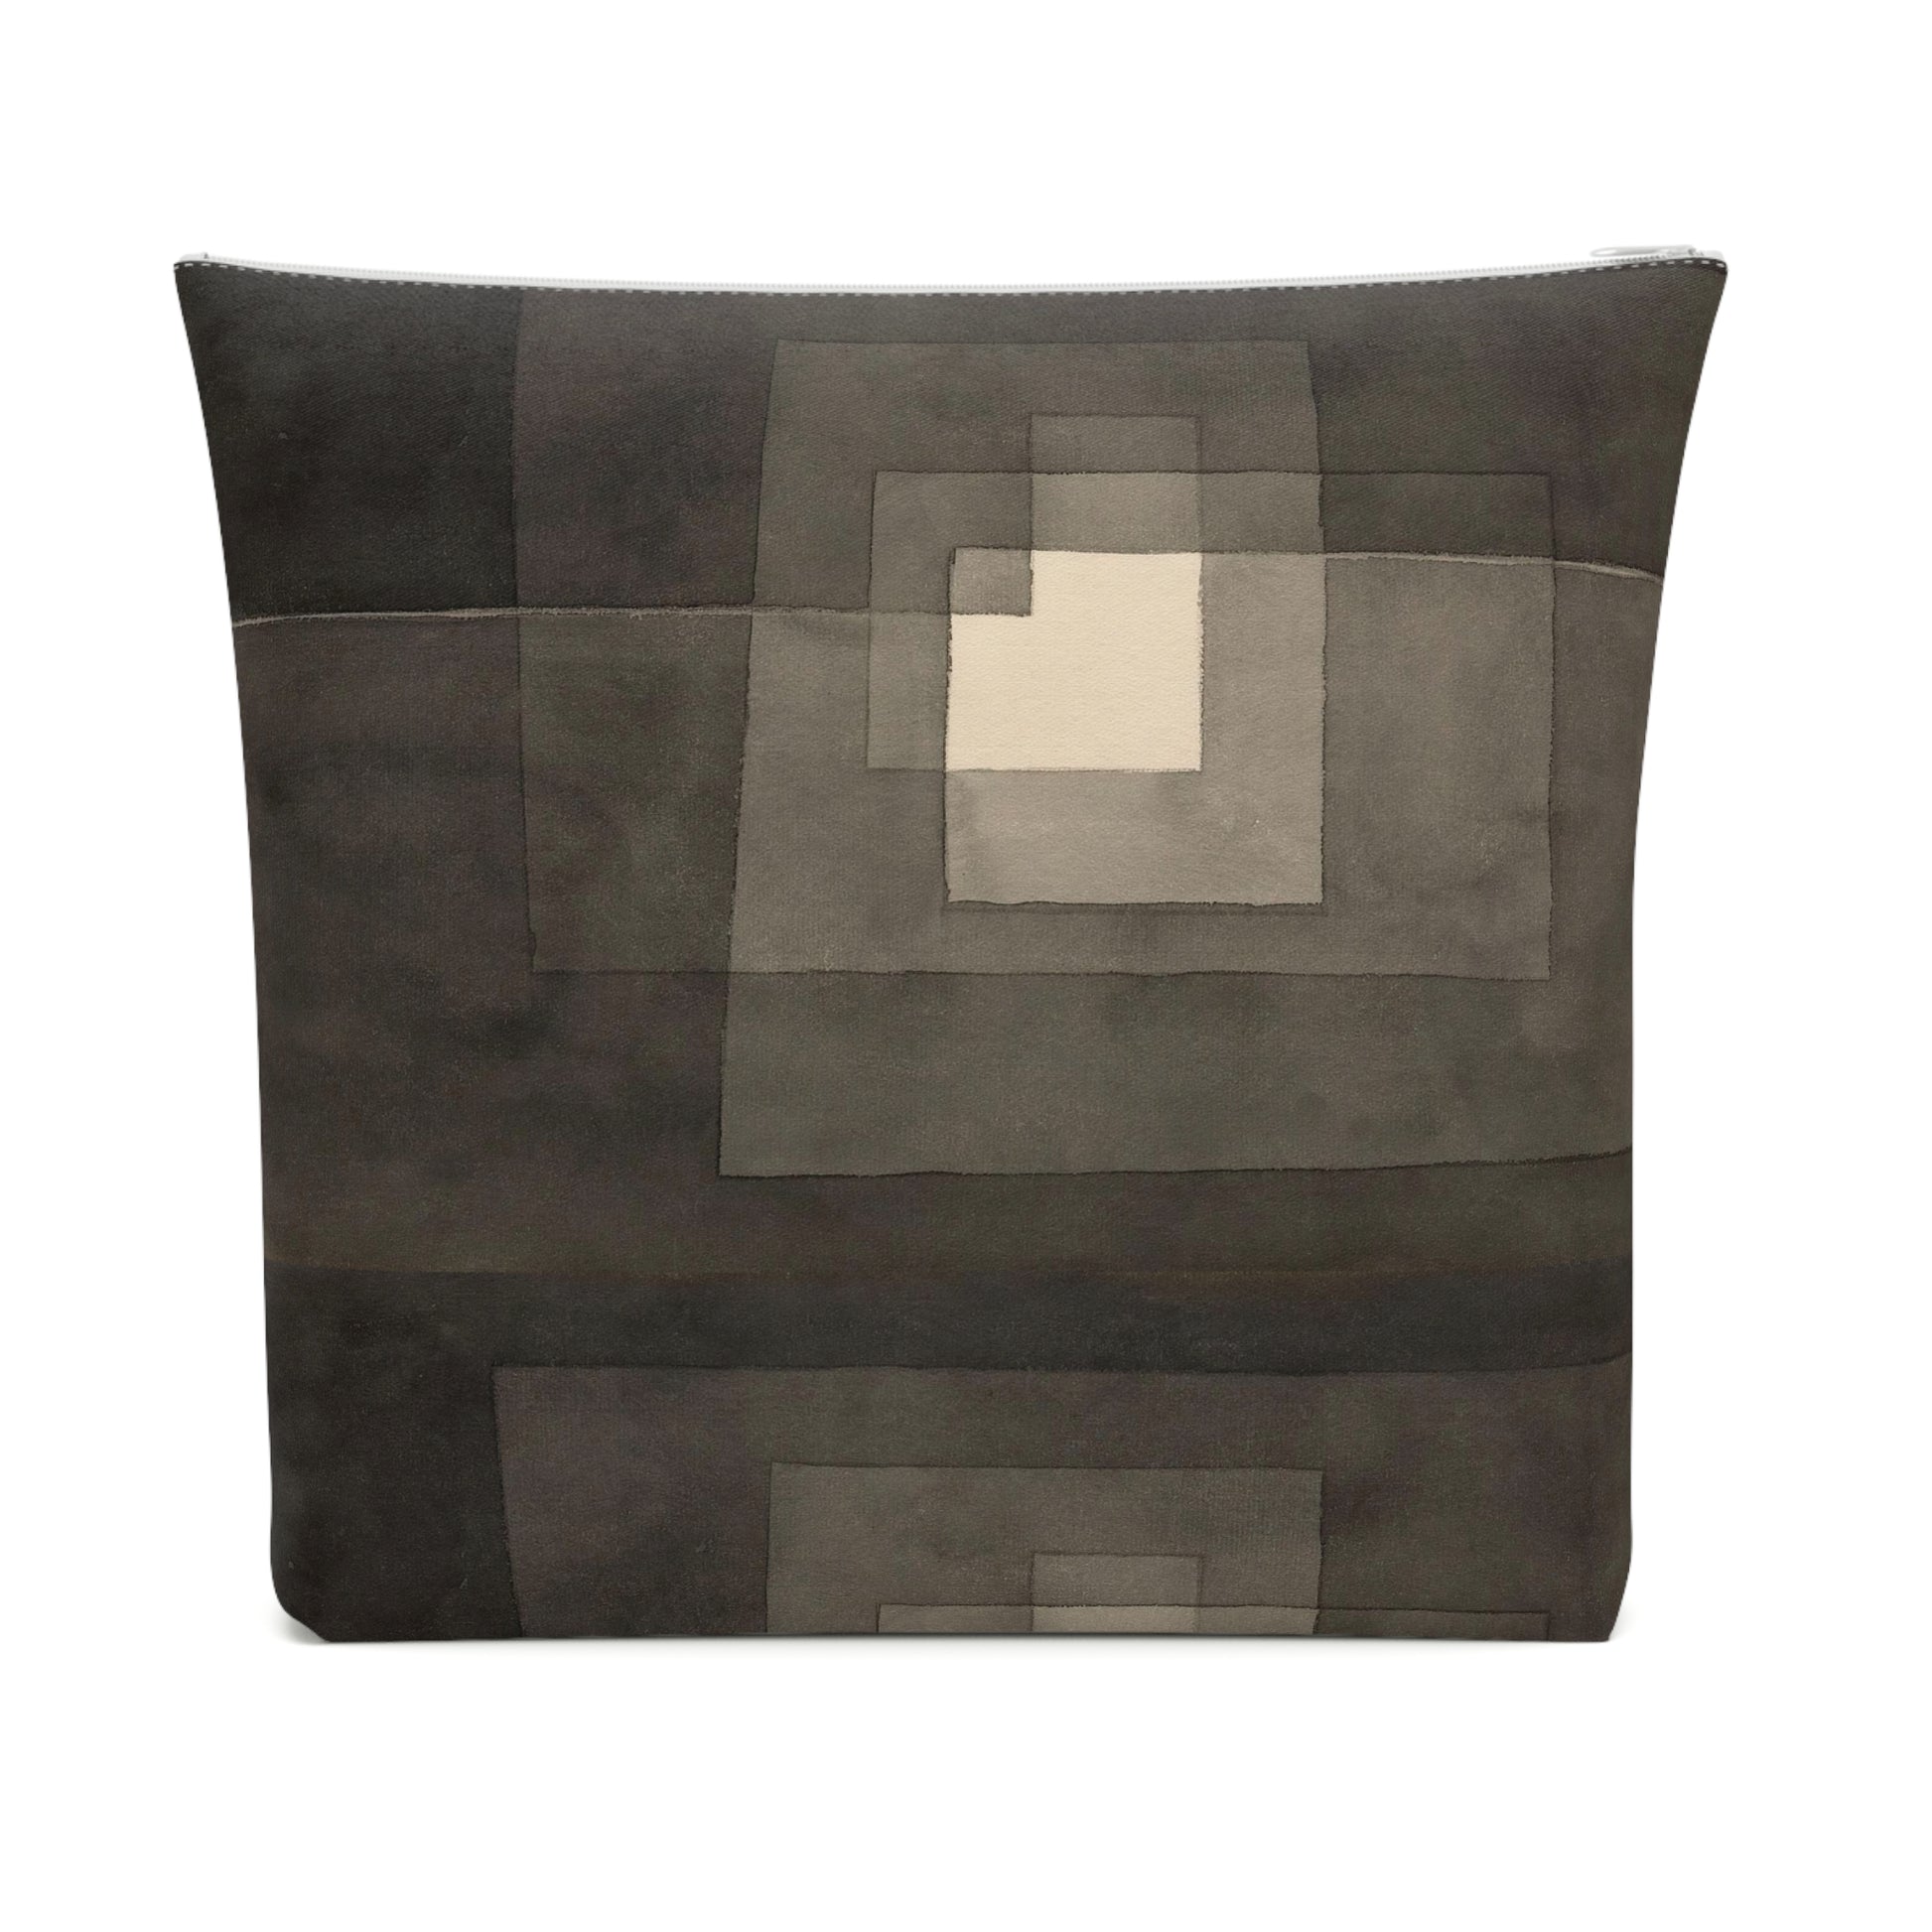 a gray pillow with a square and rectangle pattern